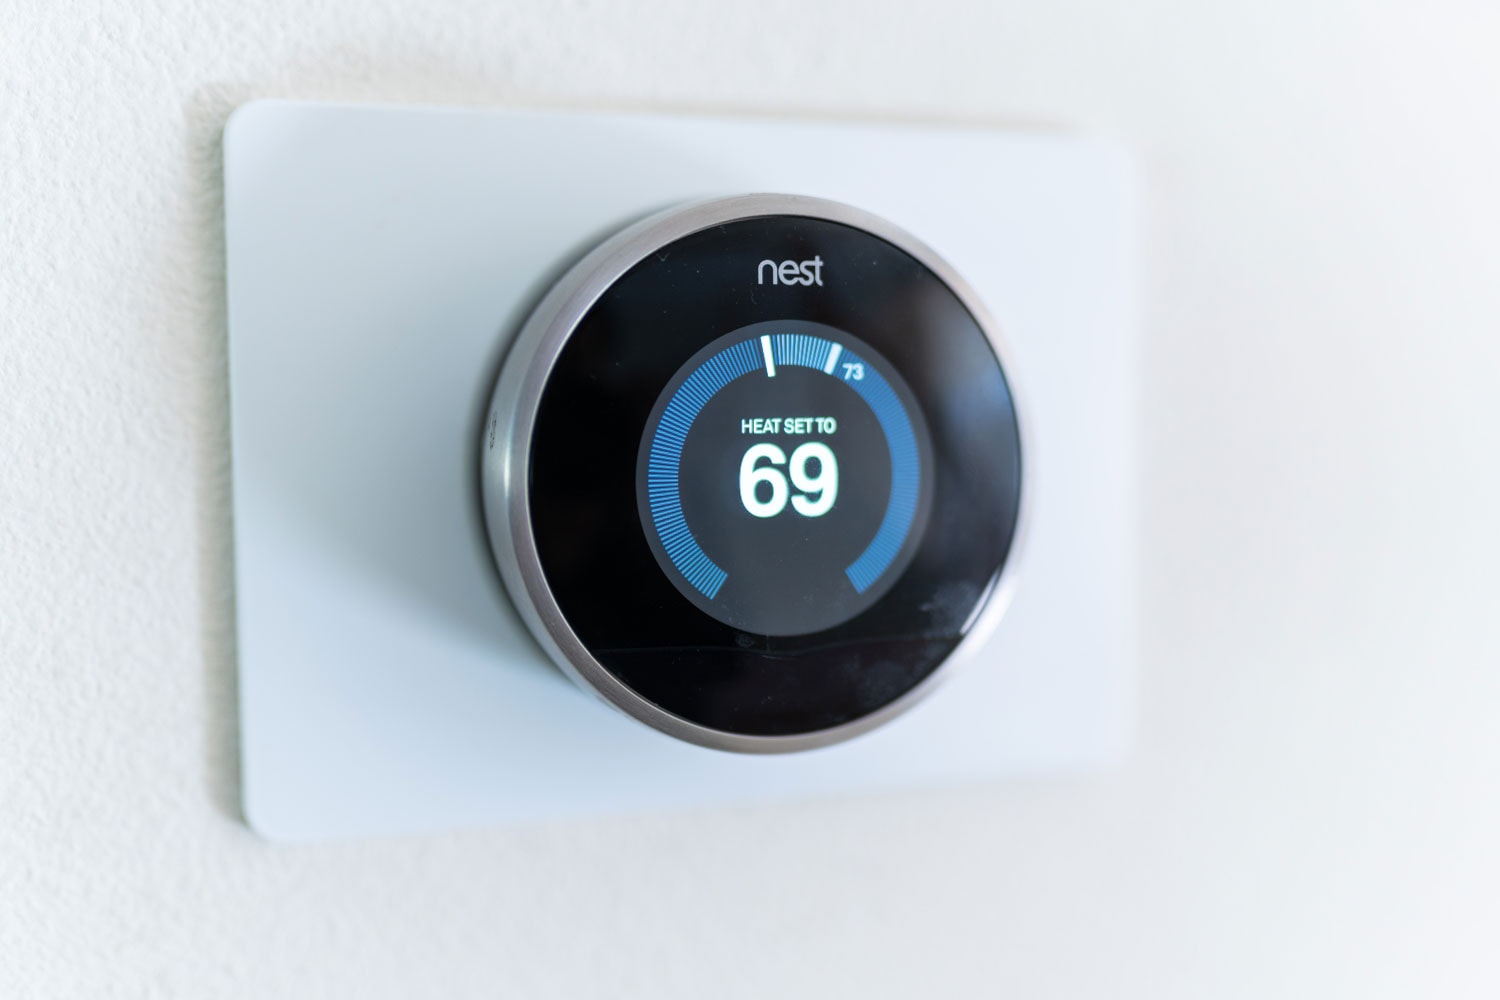 Nest thermostat set to a comfortable temperature